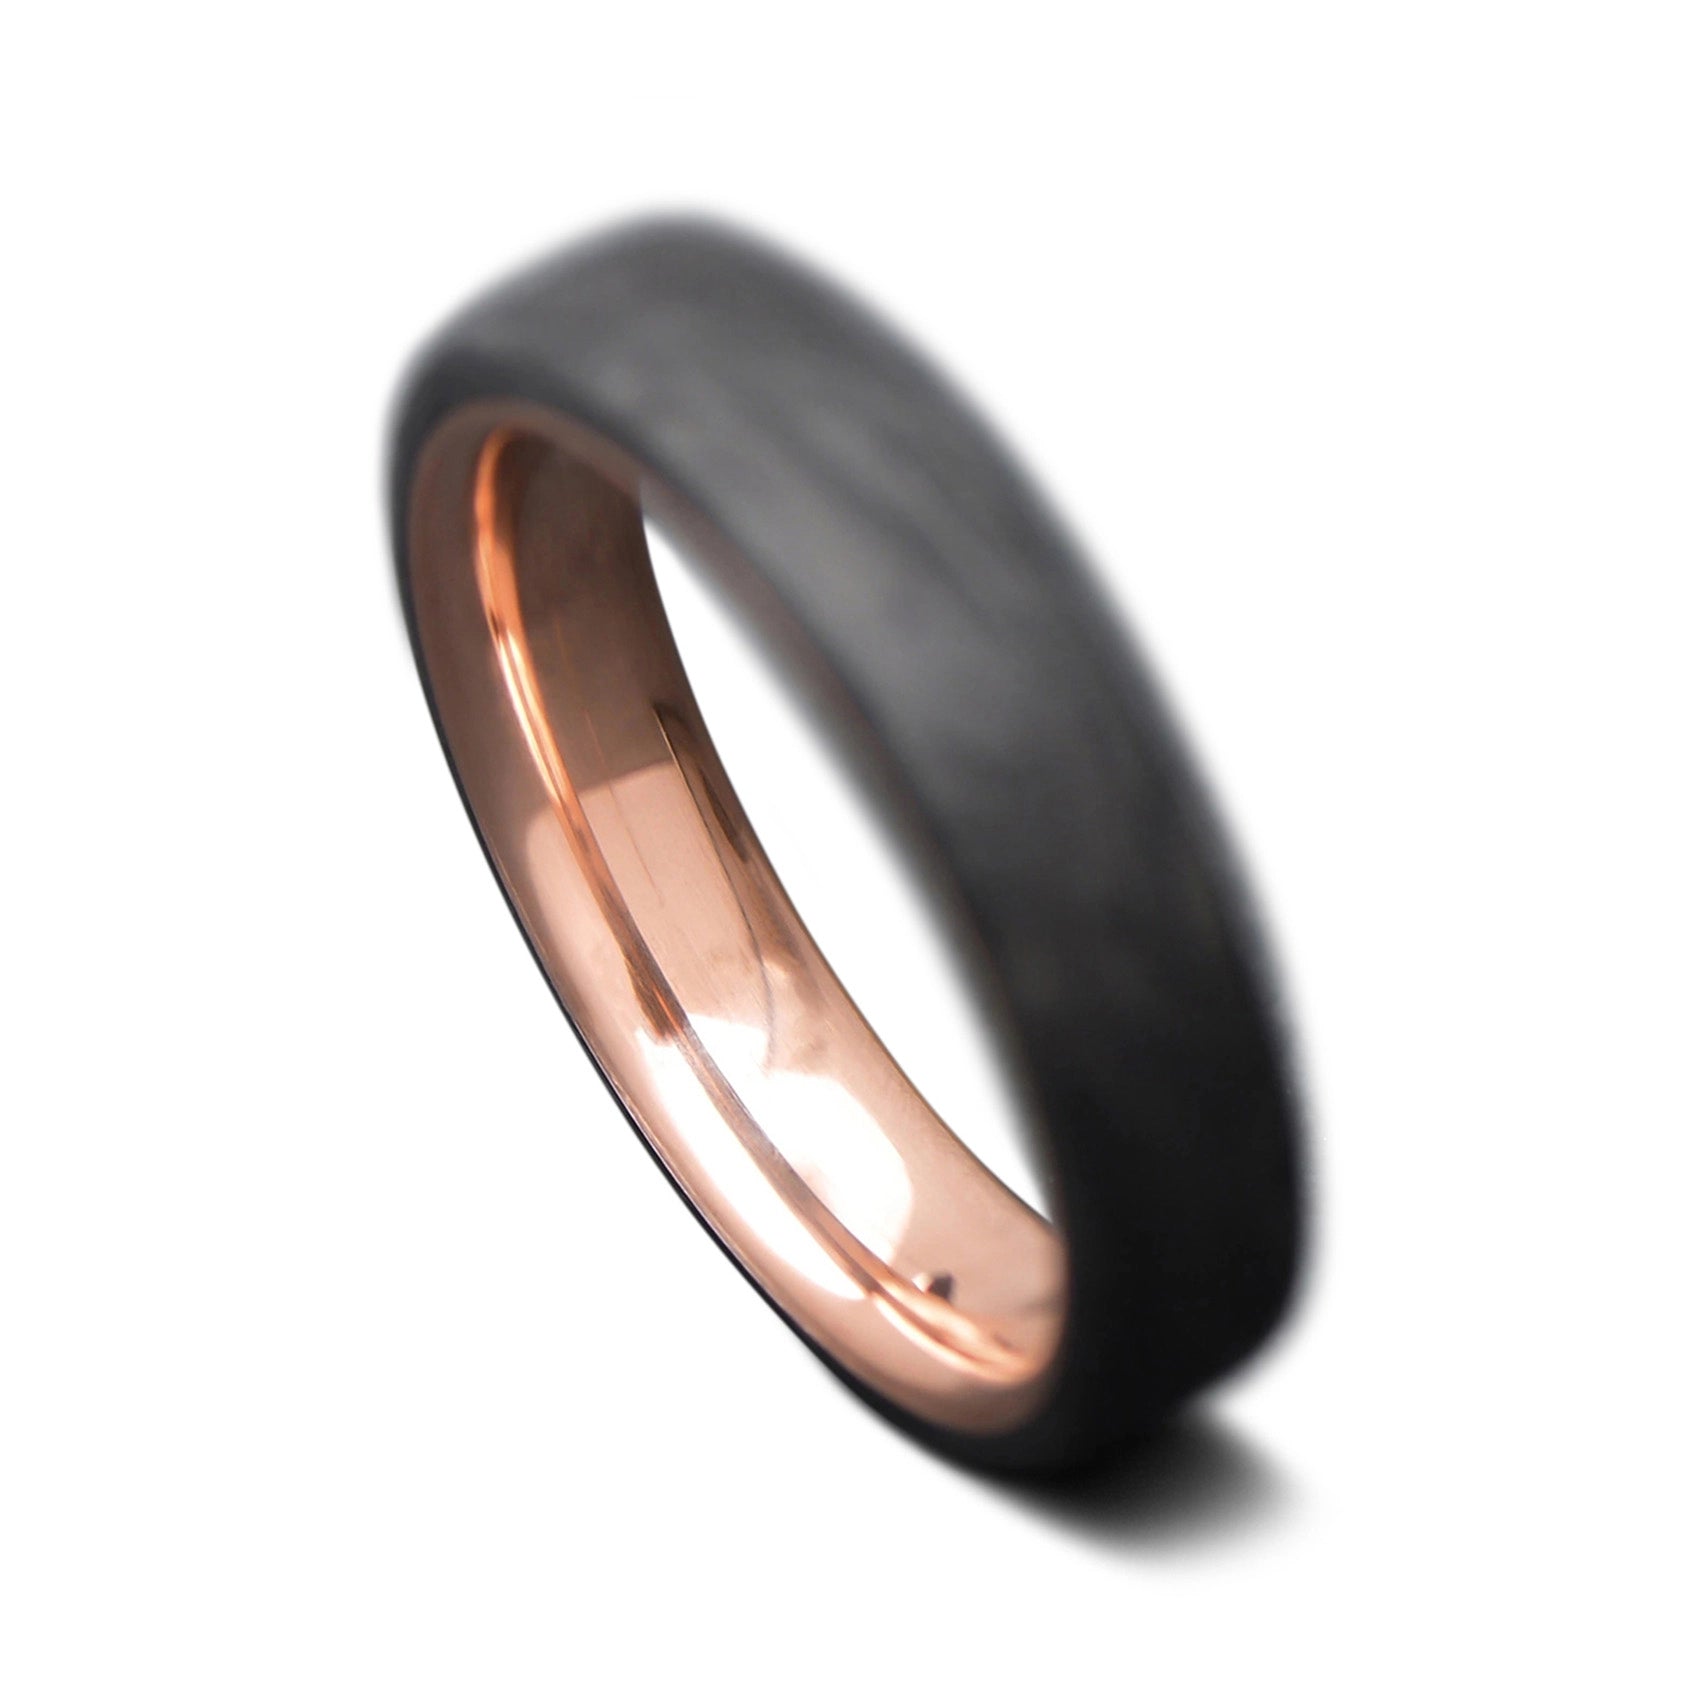  Back of CarbonForged Core Ring with Rose Gold inner sleeve, 5mm -THE QUEST